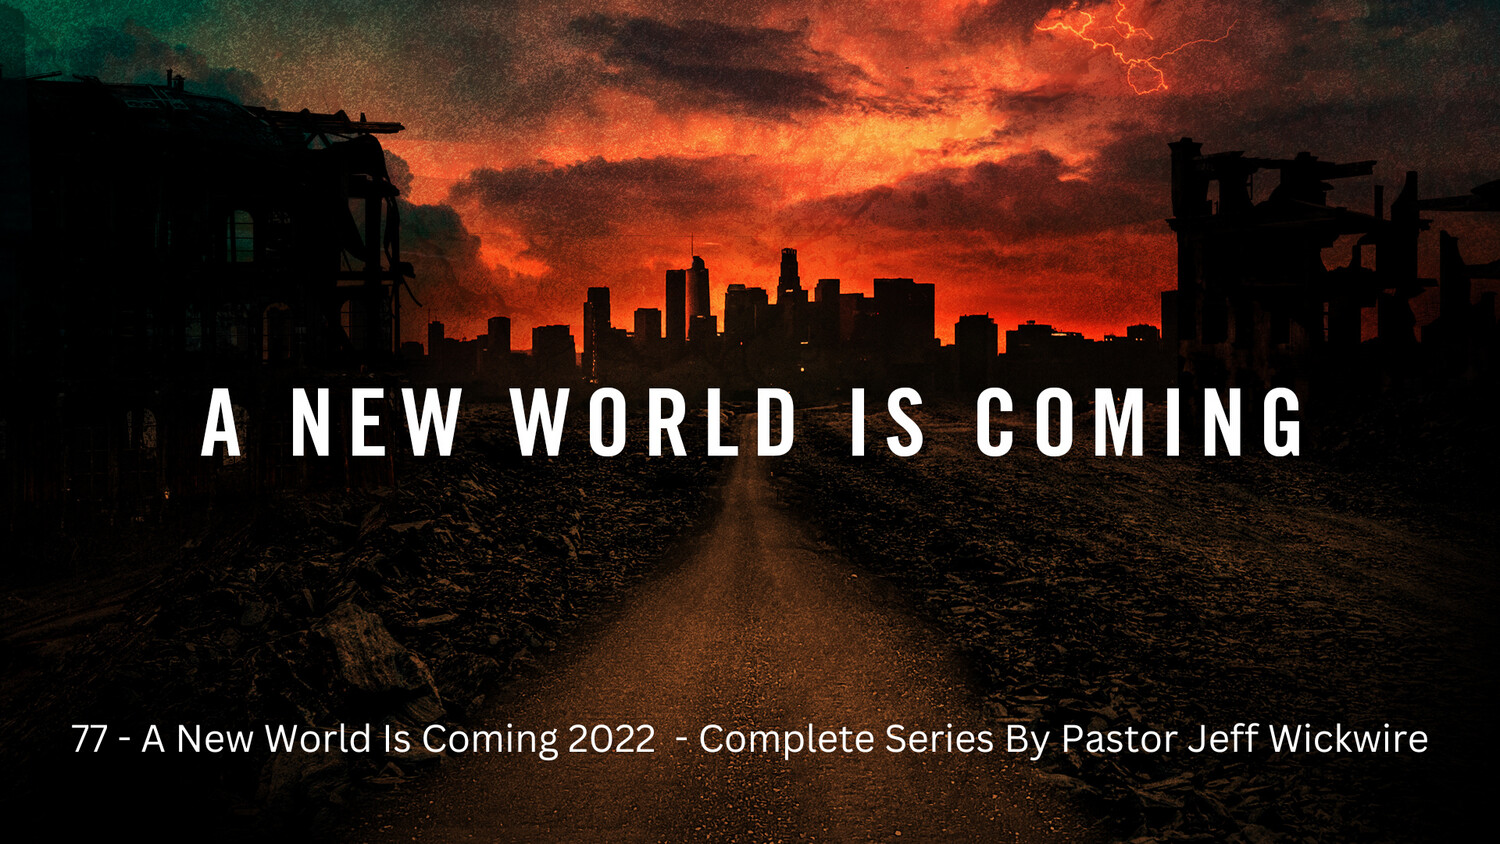 77 - A New World Is Coming 2022  - Complete Series By Pastor Jeff Wickwire